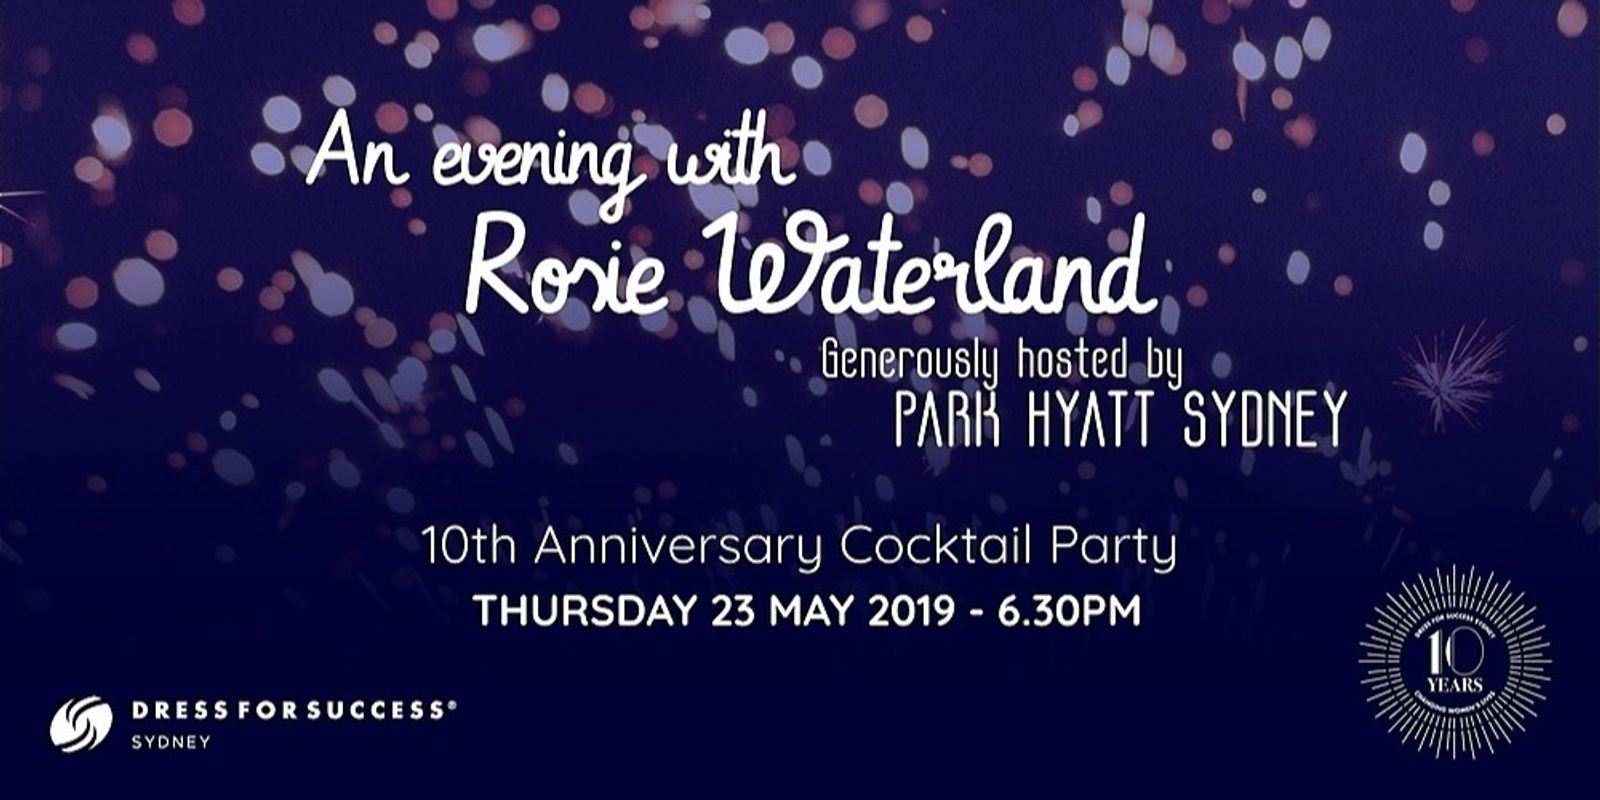 Banner image for An evening with Rosie Waterland